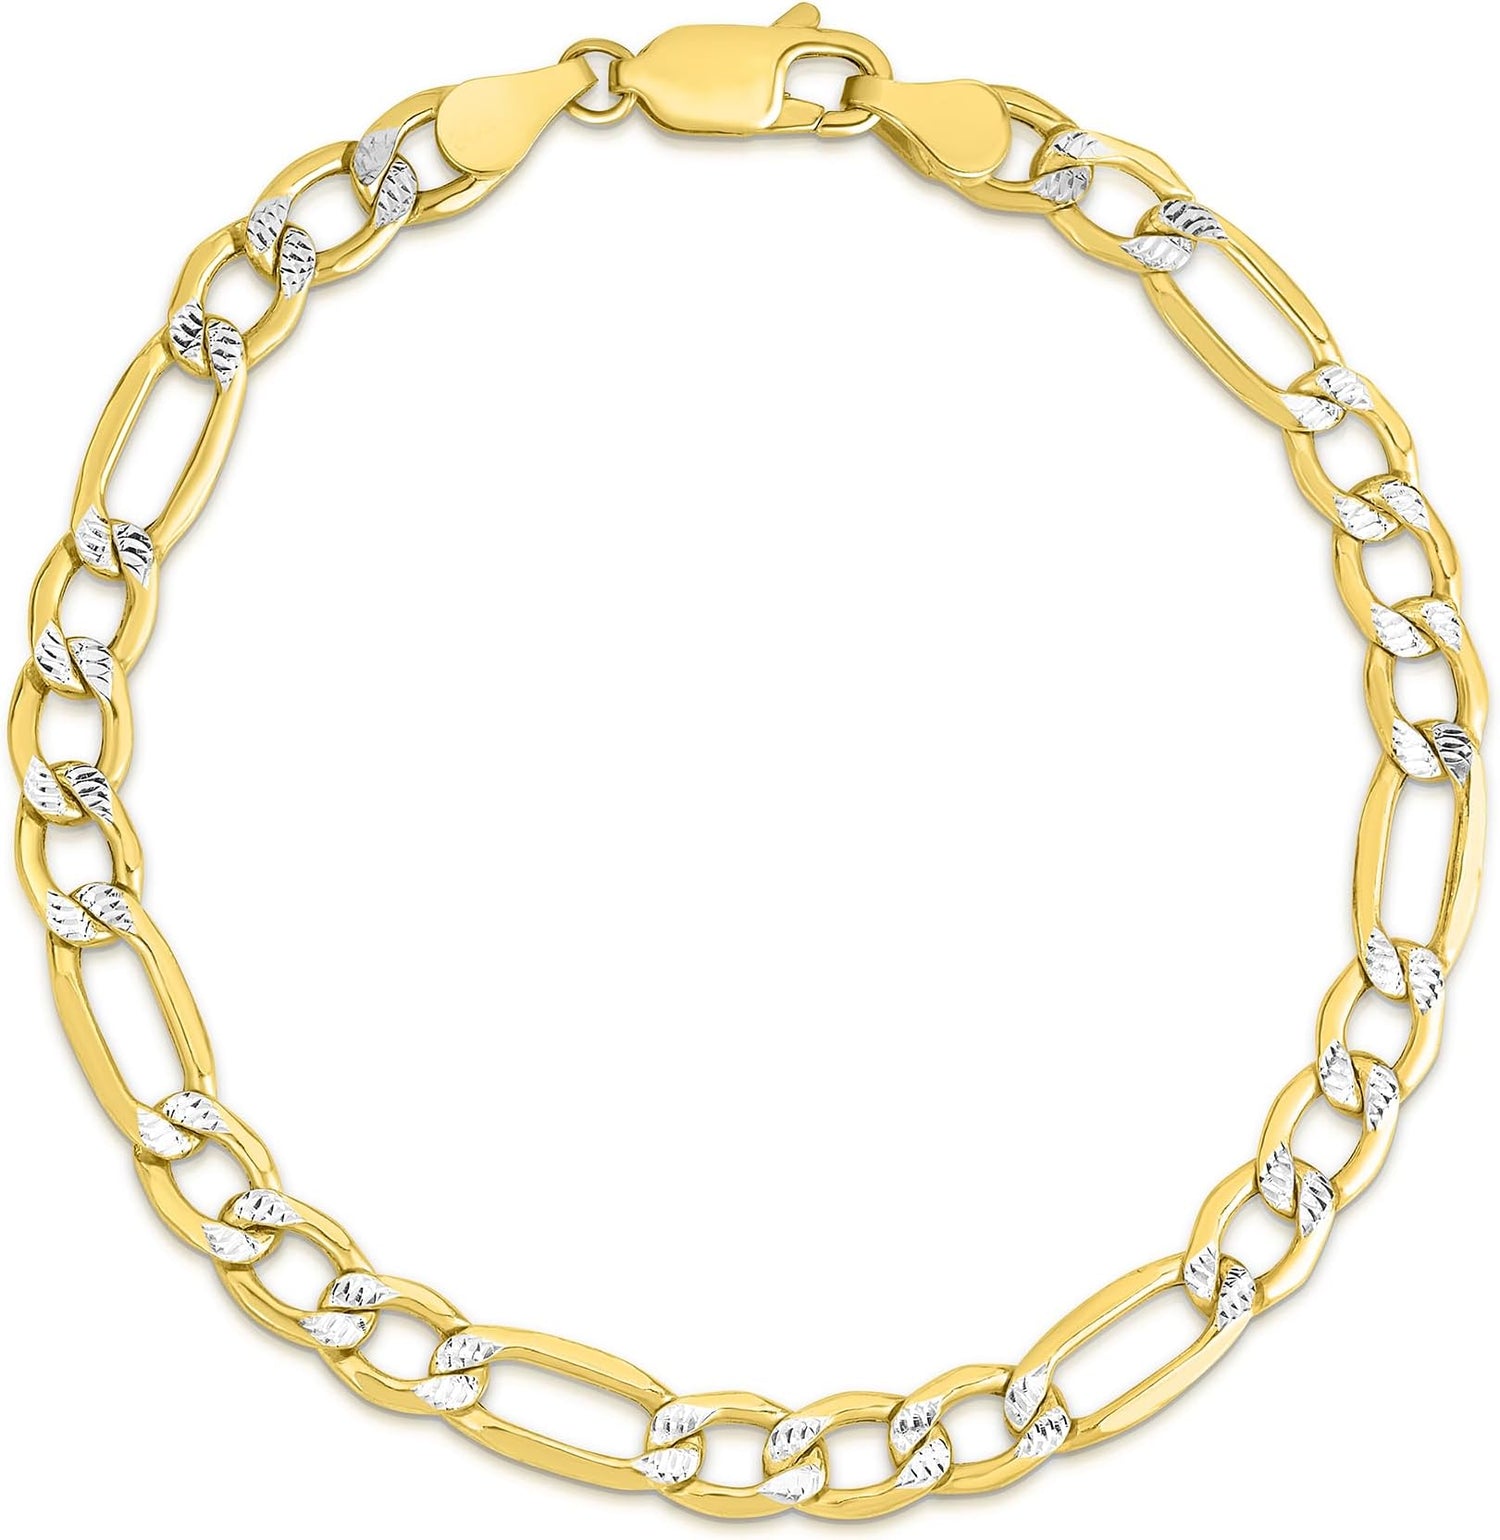 10k Two-Tone Gold 6.5mm Lite Pave Diamond Cut Figaro Chain Link Bracelet or Anklet